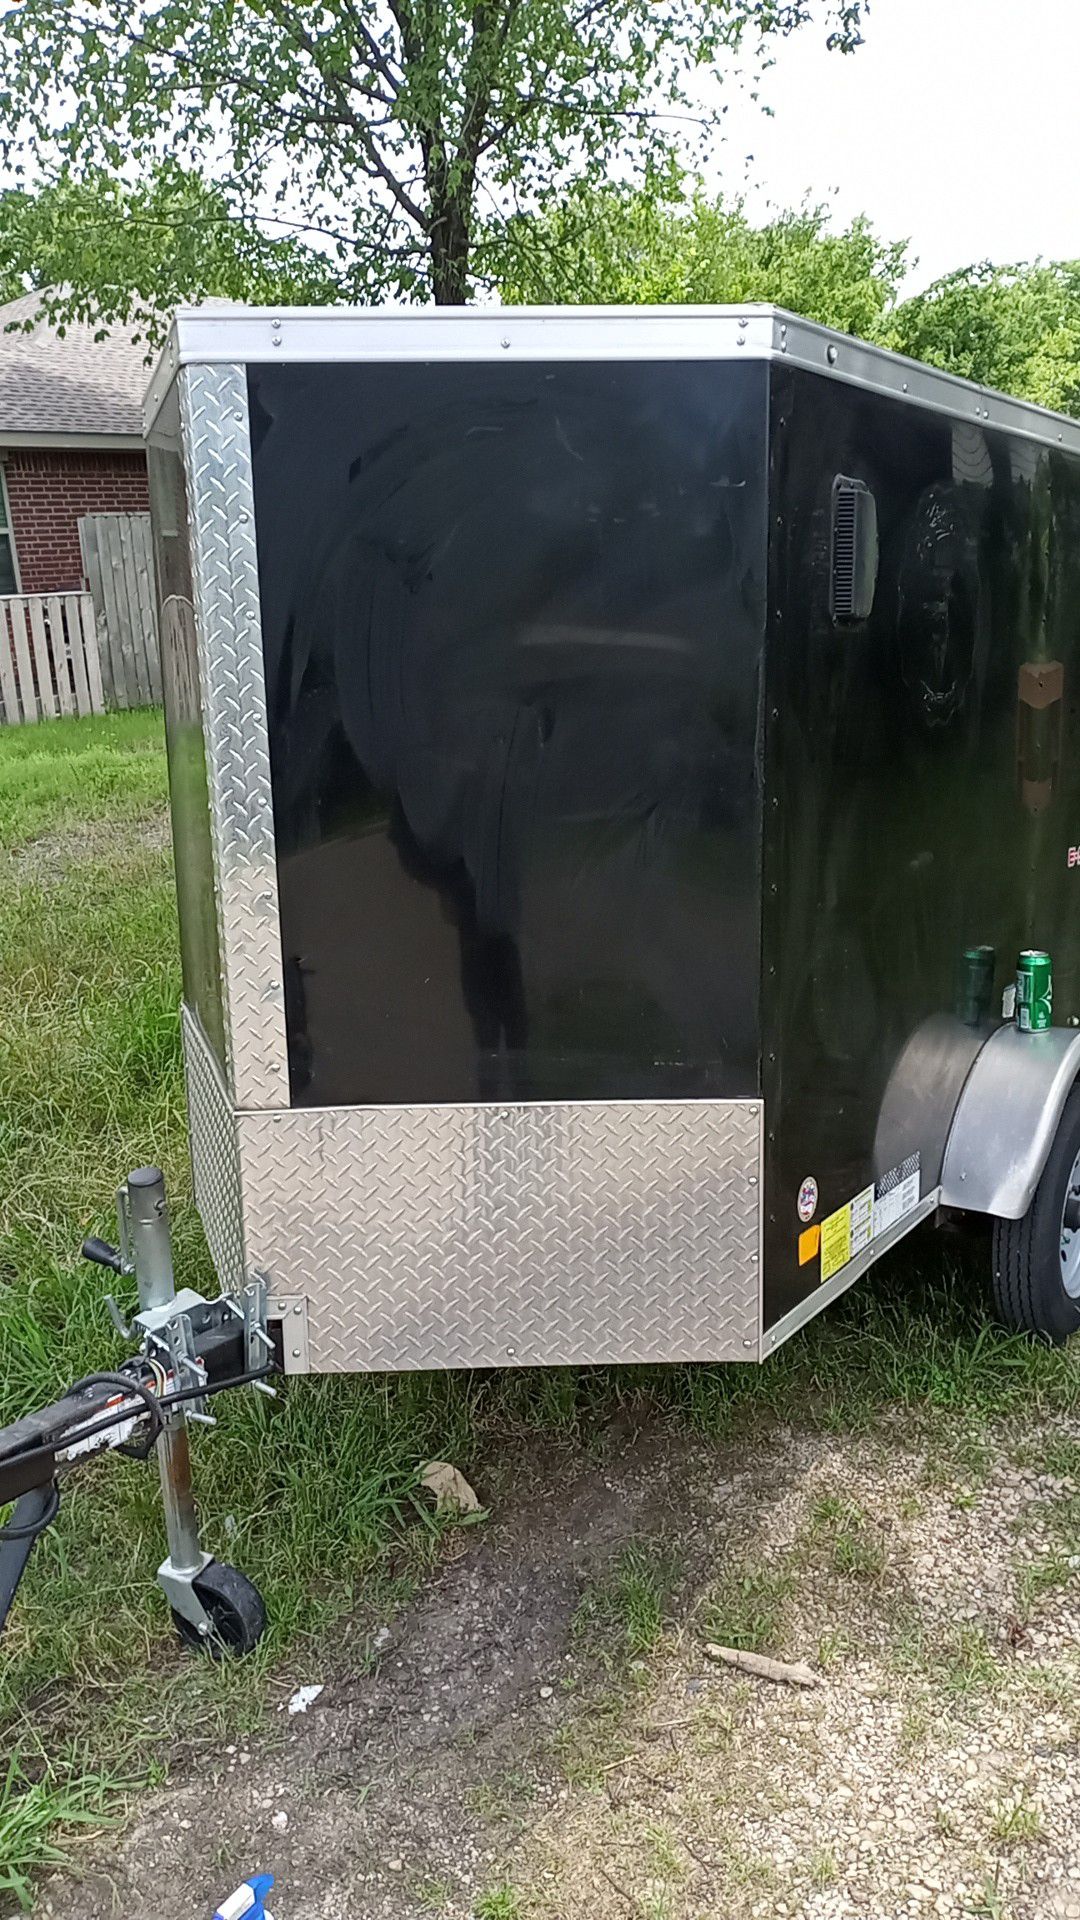 E-Series enclosed utility trailer perfect for tools small moving projects or anyting else fully enclosed weatherproof